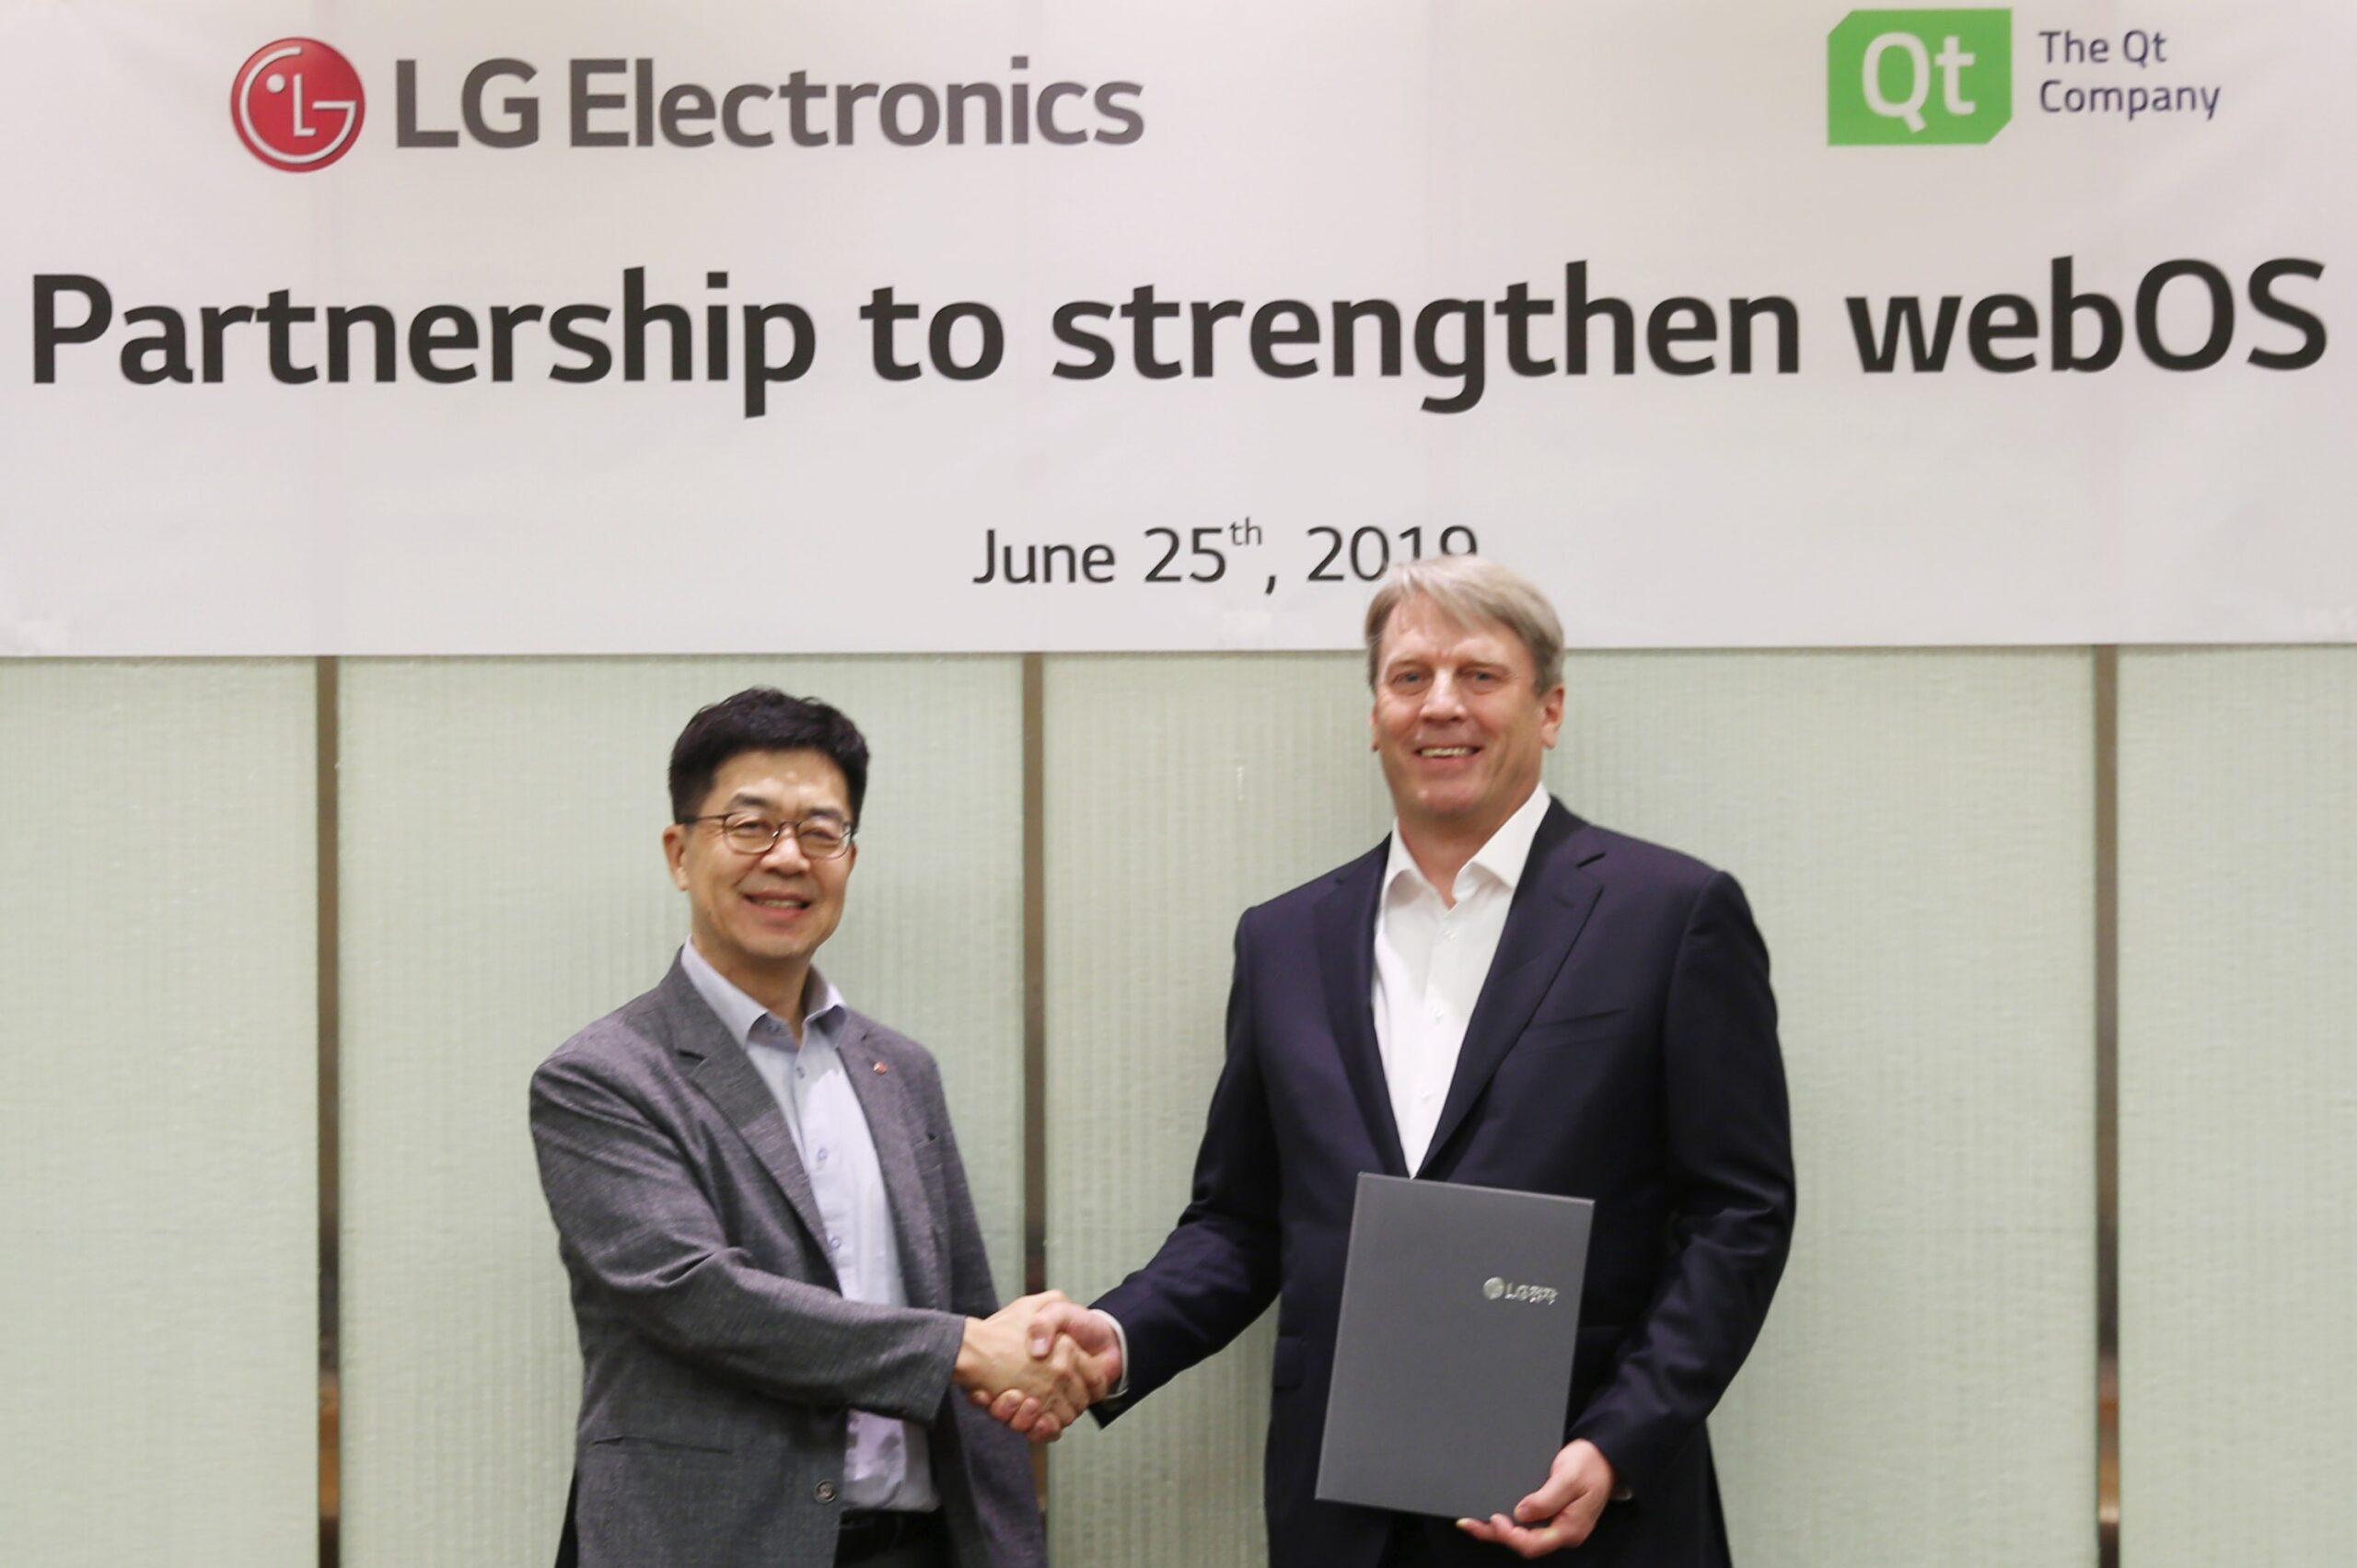 Dr. I.P. Park, president and Chief Technology Officer of LG Electronics, and Juha Varelius, CEO of Qt, shake hands after signing an MOU.